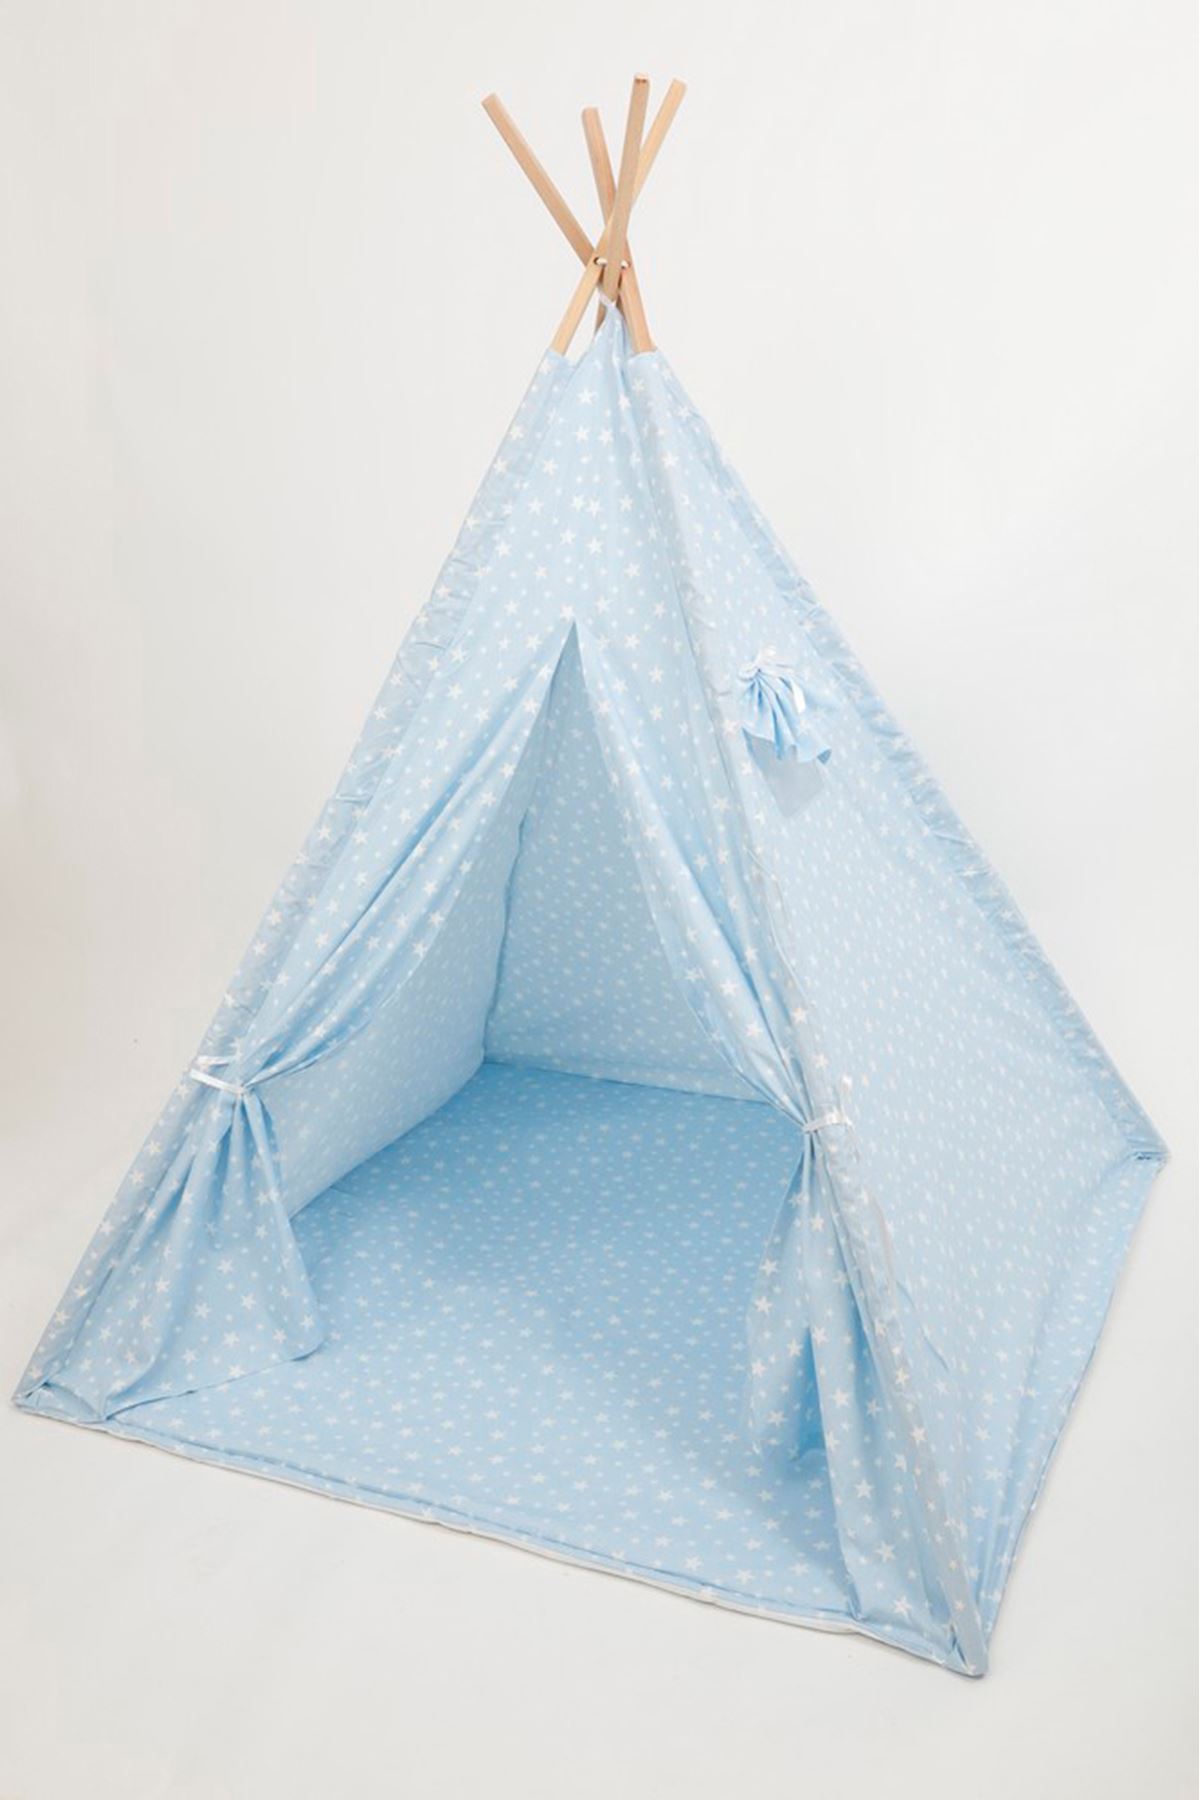 Play Tent "Blue Star"